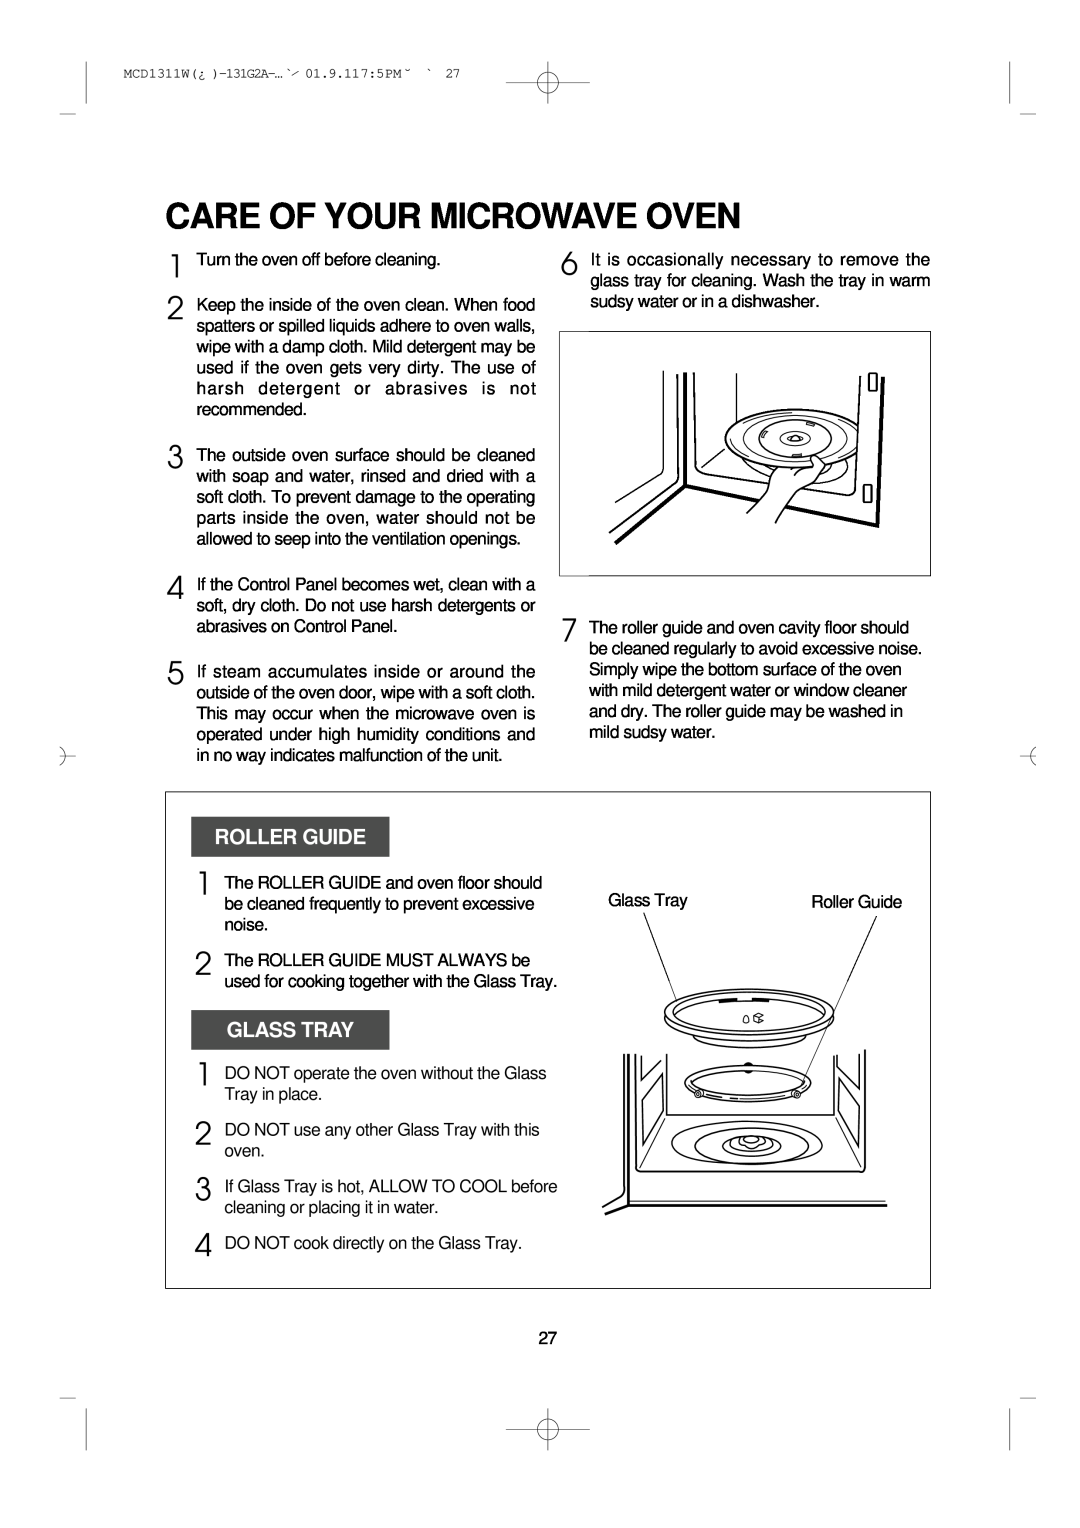 Magic Chef MCD1311W instruction manual Care Of Your Microwave Oven, 1 2 3 4, Roller Guide, Glass Tray 